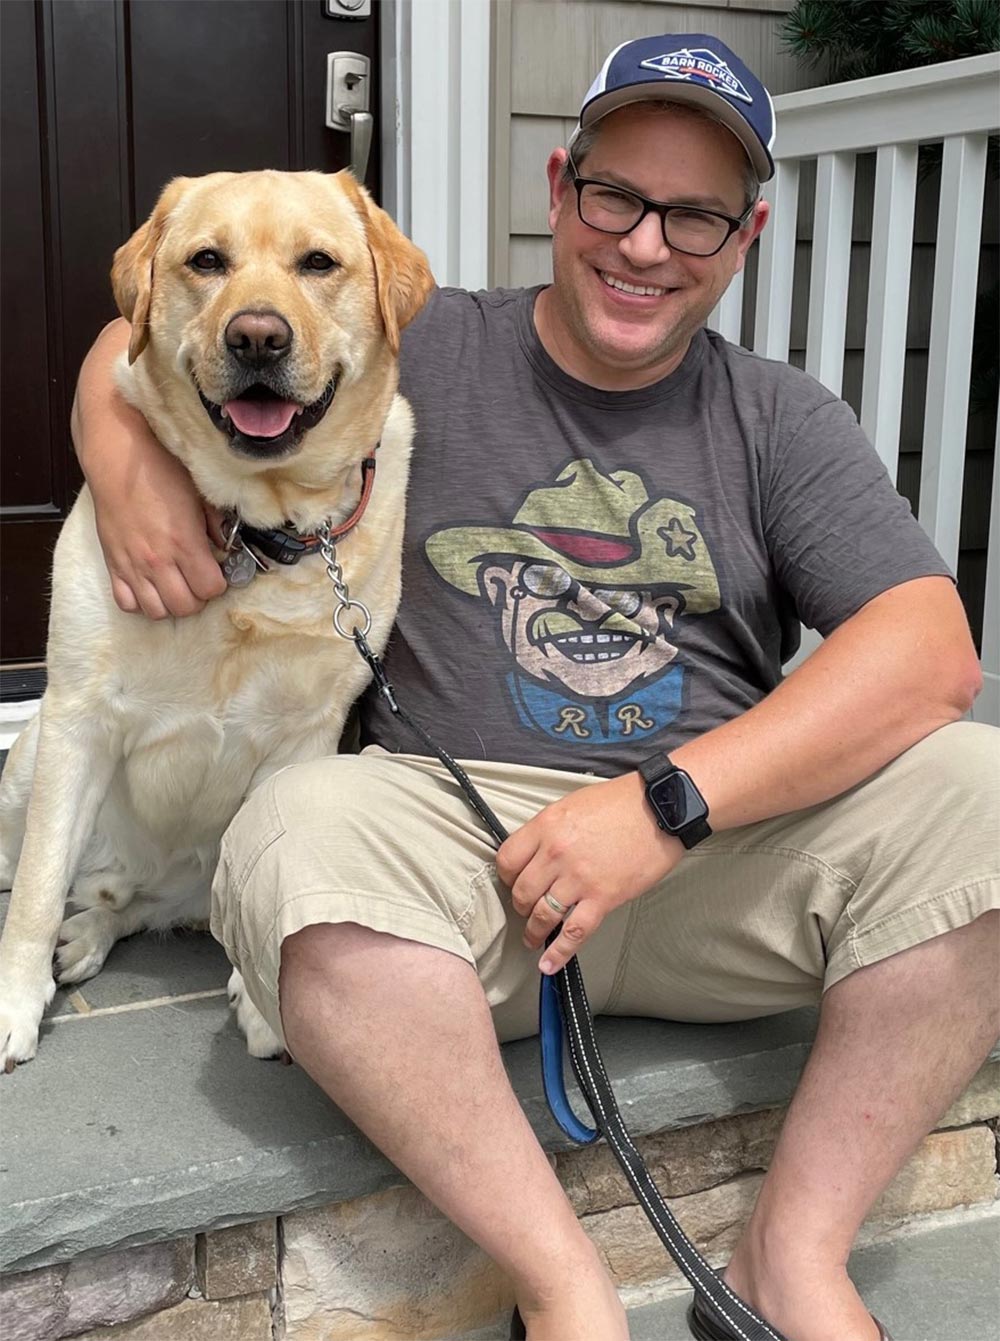 Jeff Krautheimer with his dog